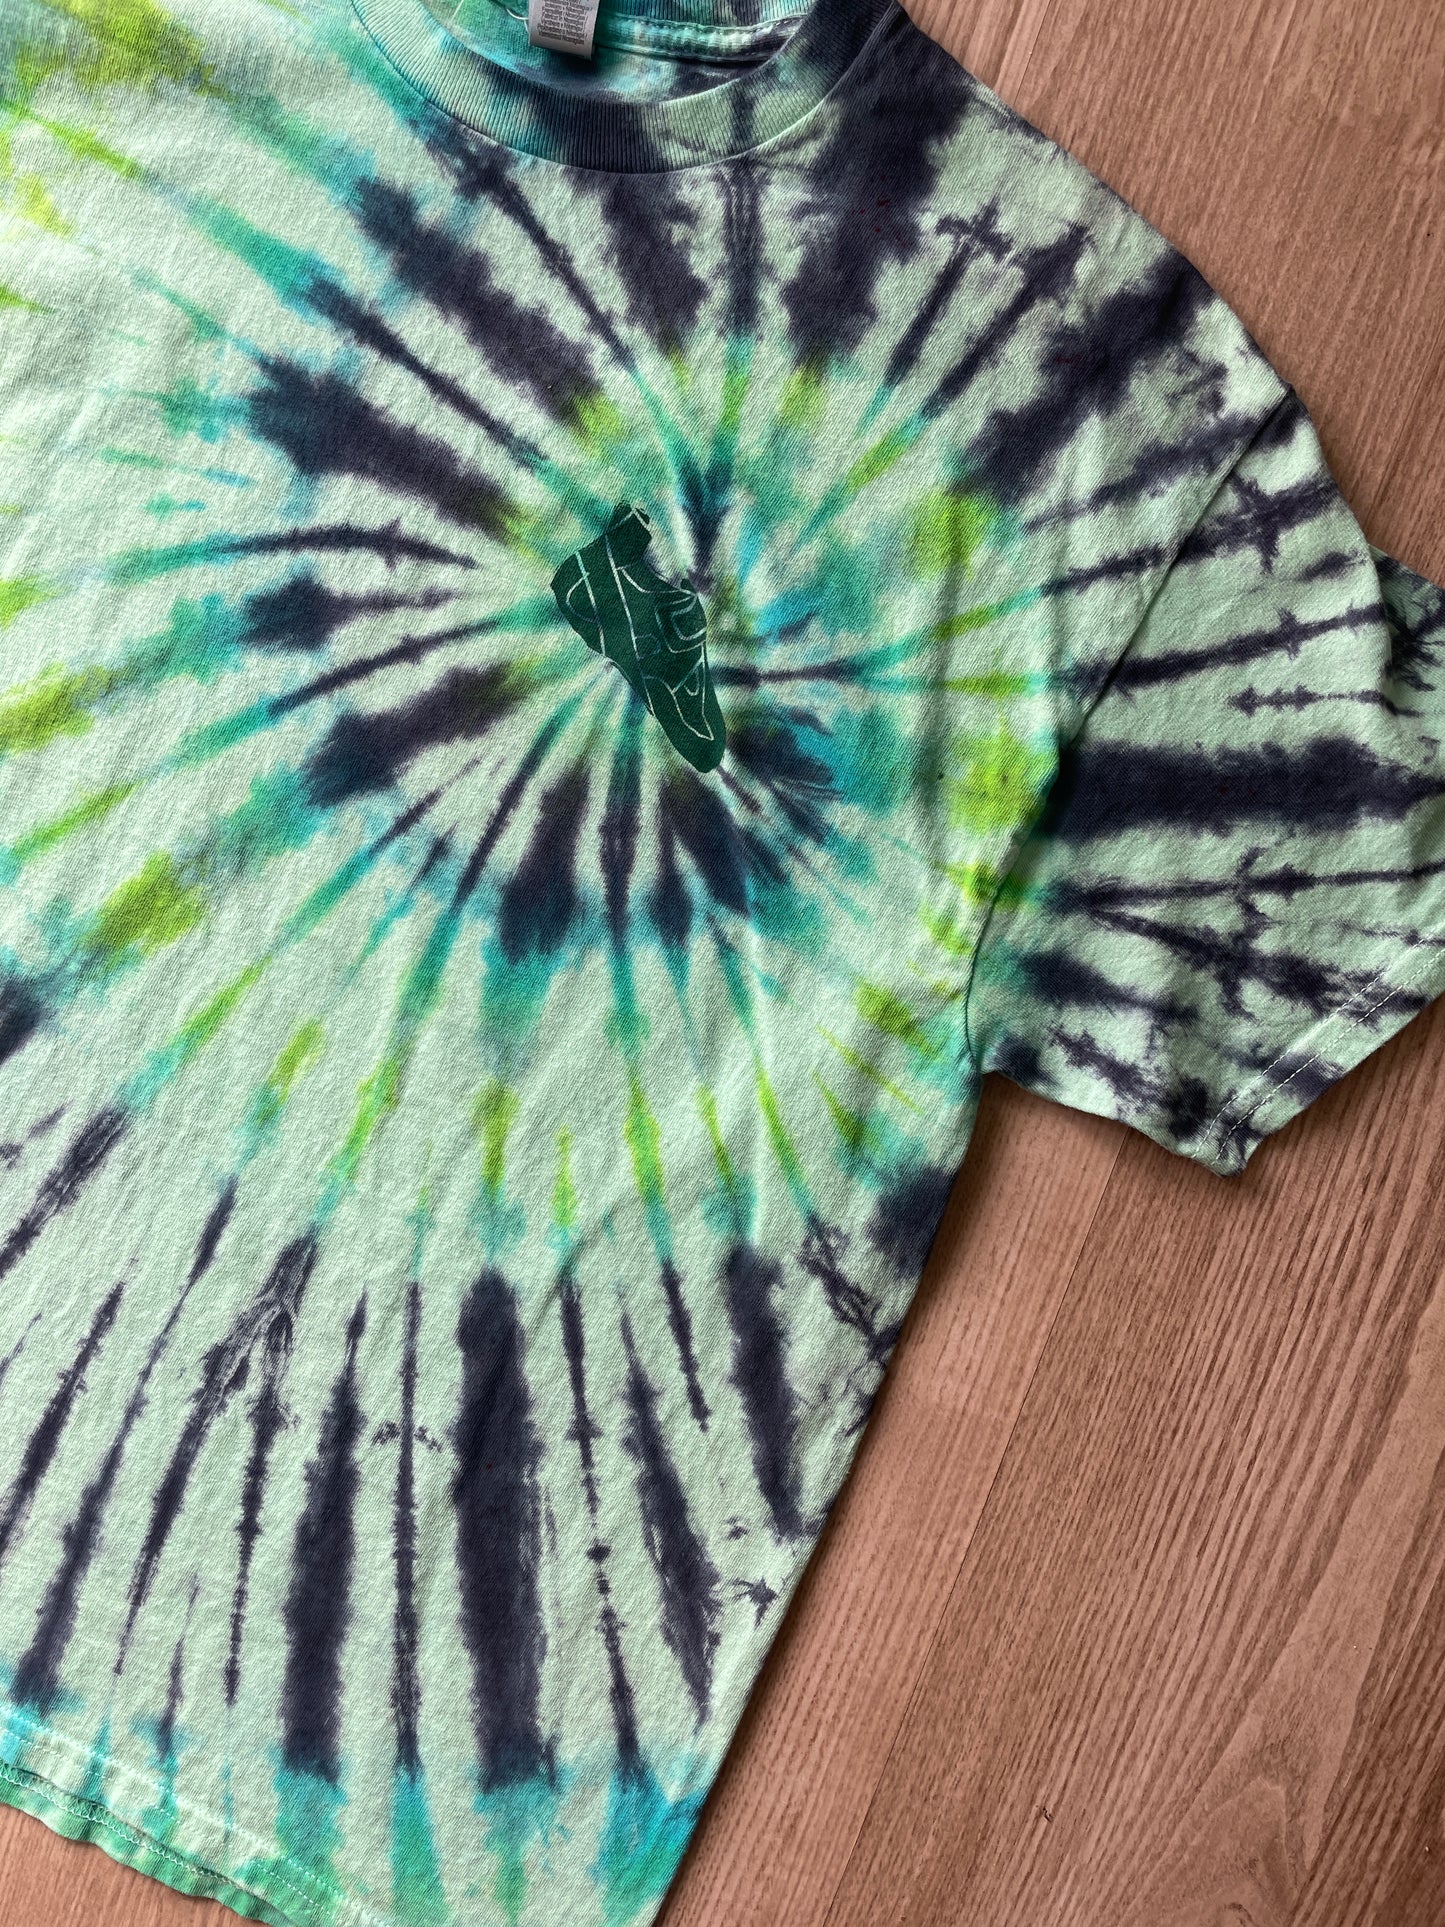 LARGE Men’s Climbing Shoe Handmade Tie Dyed T-Shirt | One-Of-a-Kind Green and Blue Spiral Short Sleeve